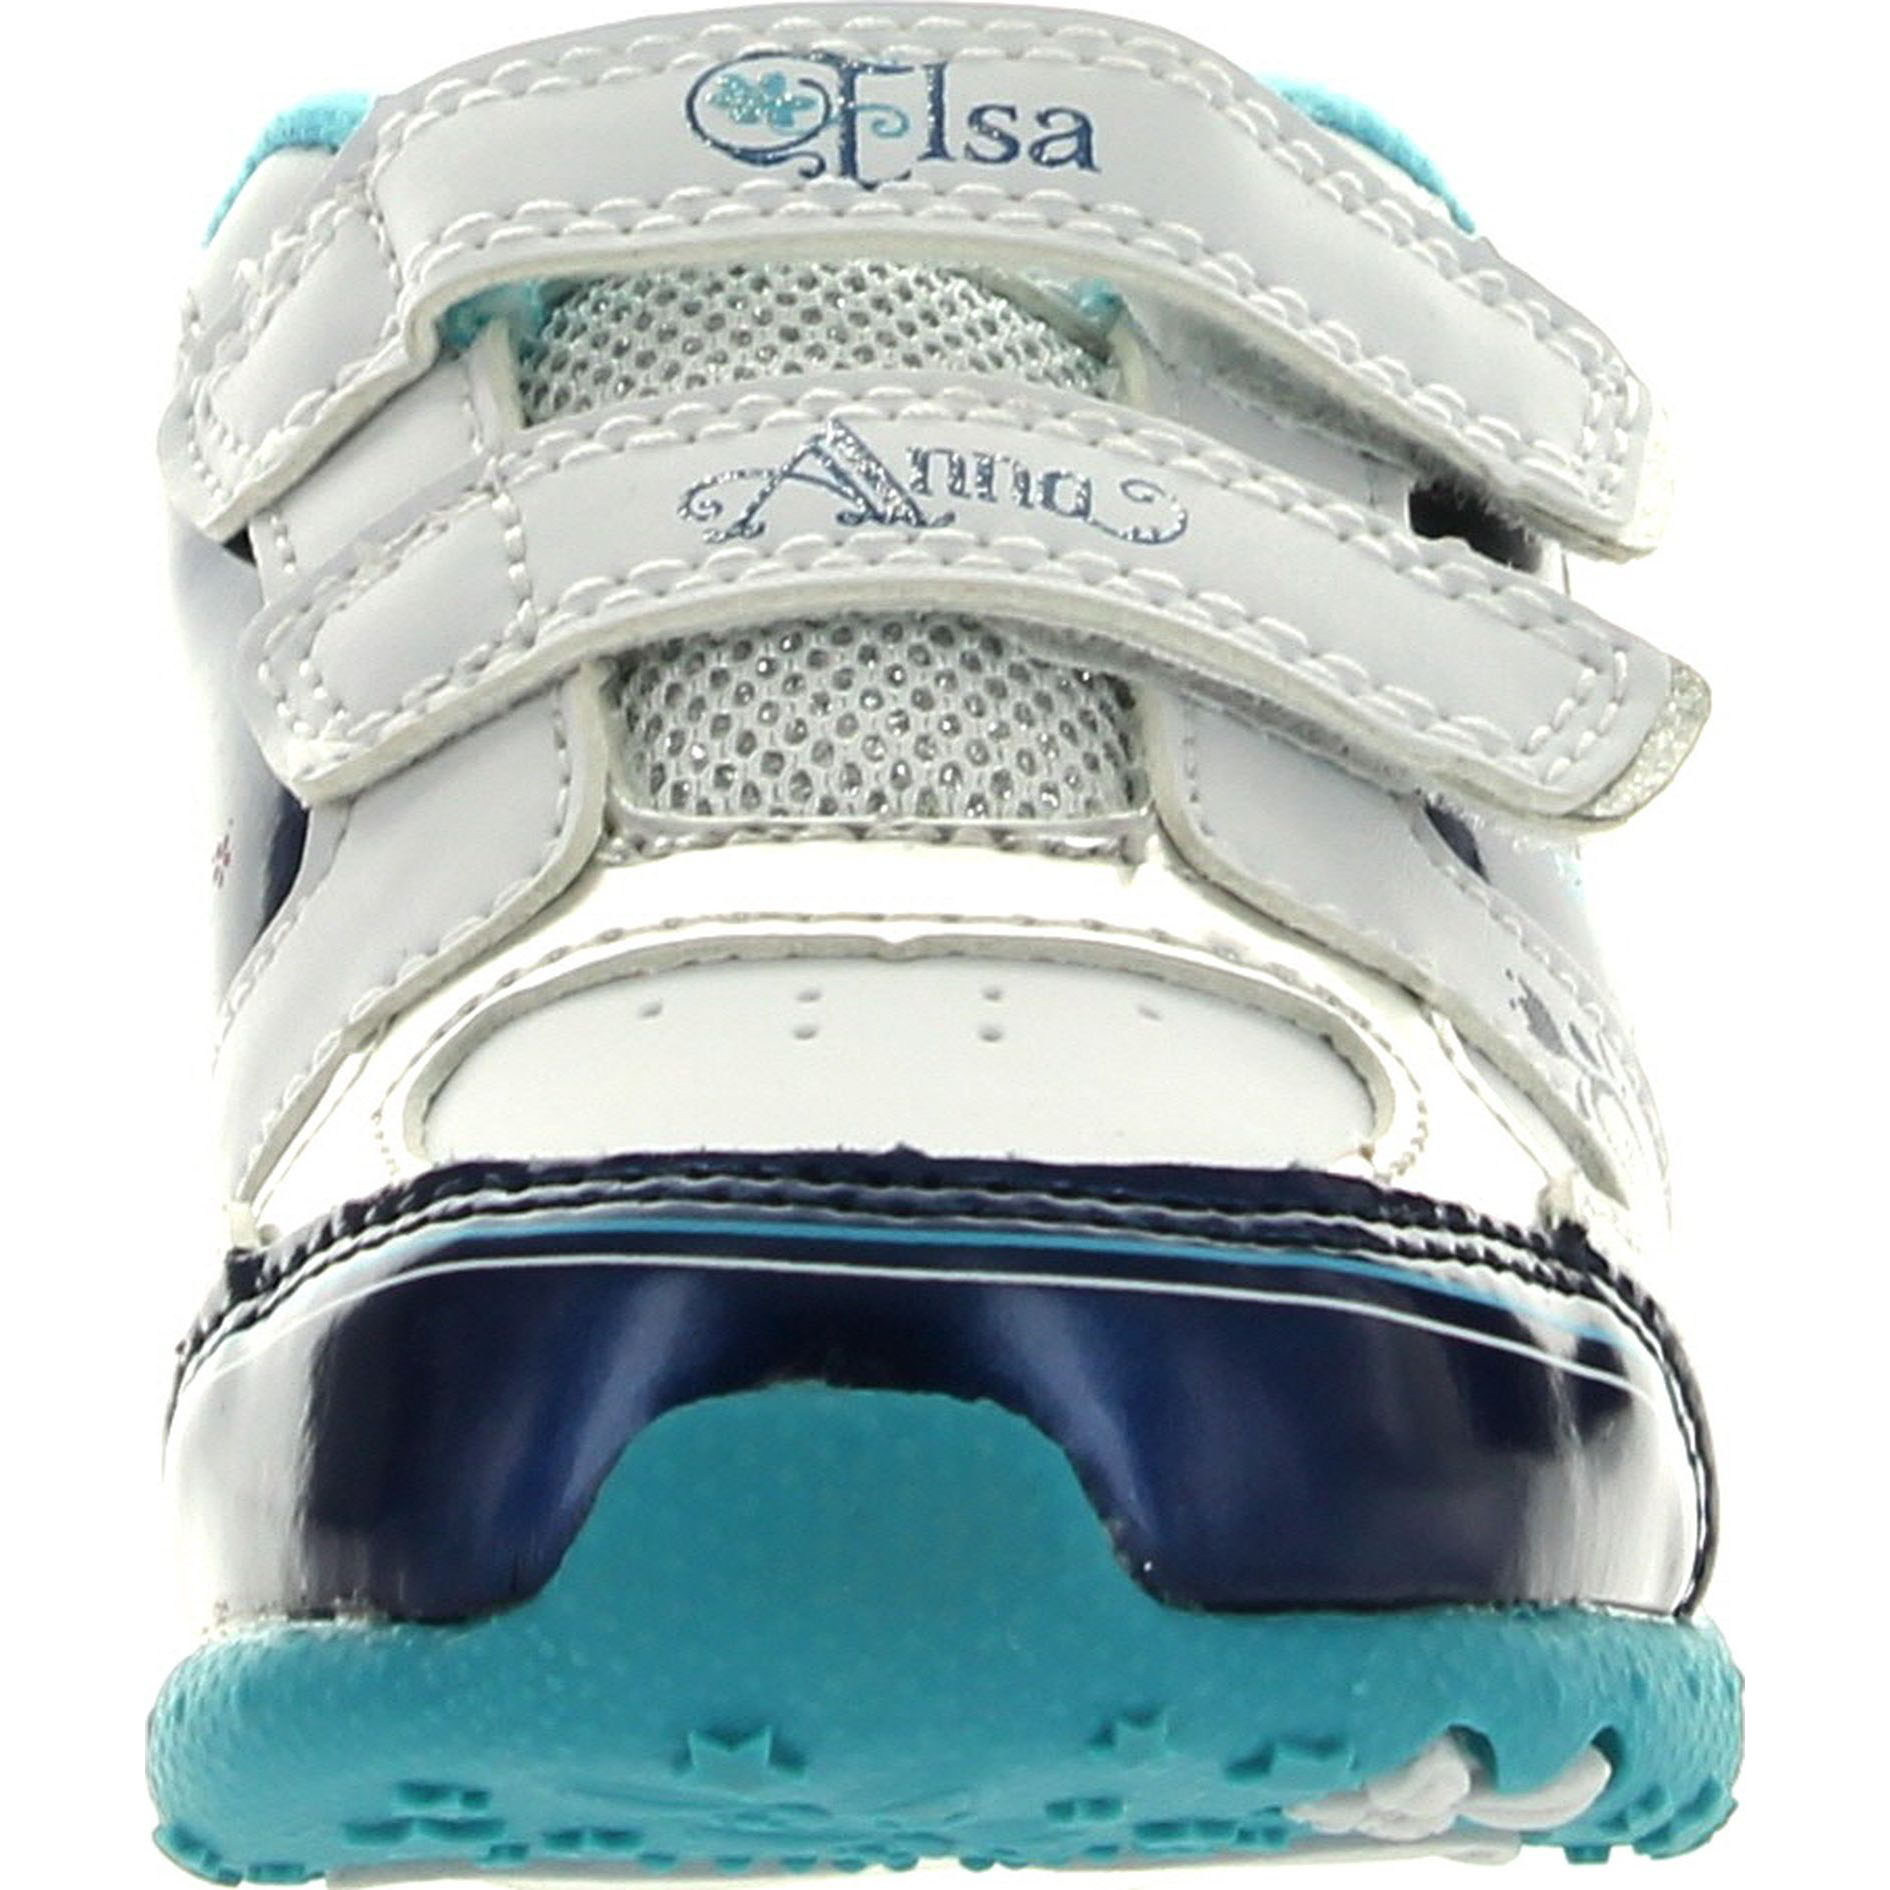 Disney Girls Frozen Princess Elsa and Anna Fashion Sneakers - image 3 of 4